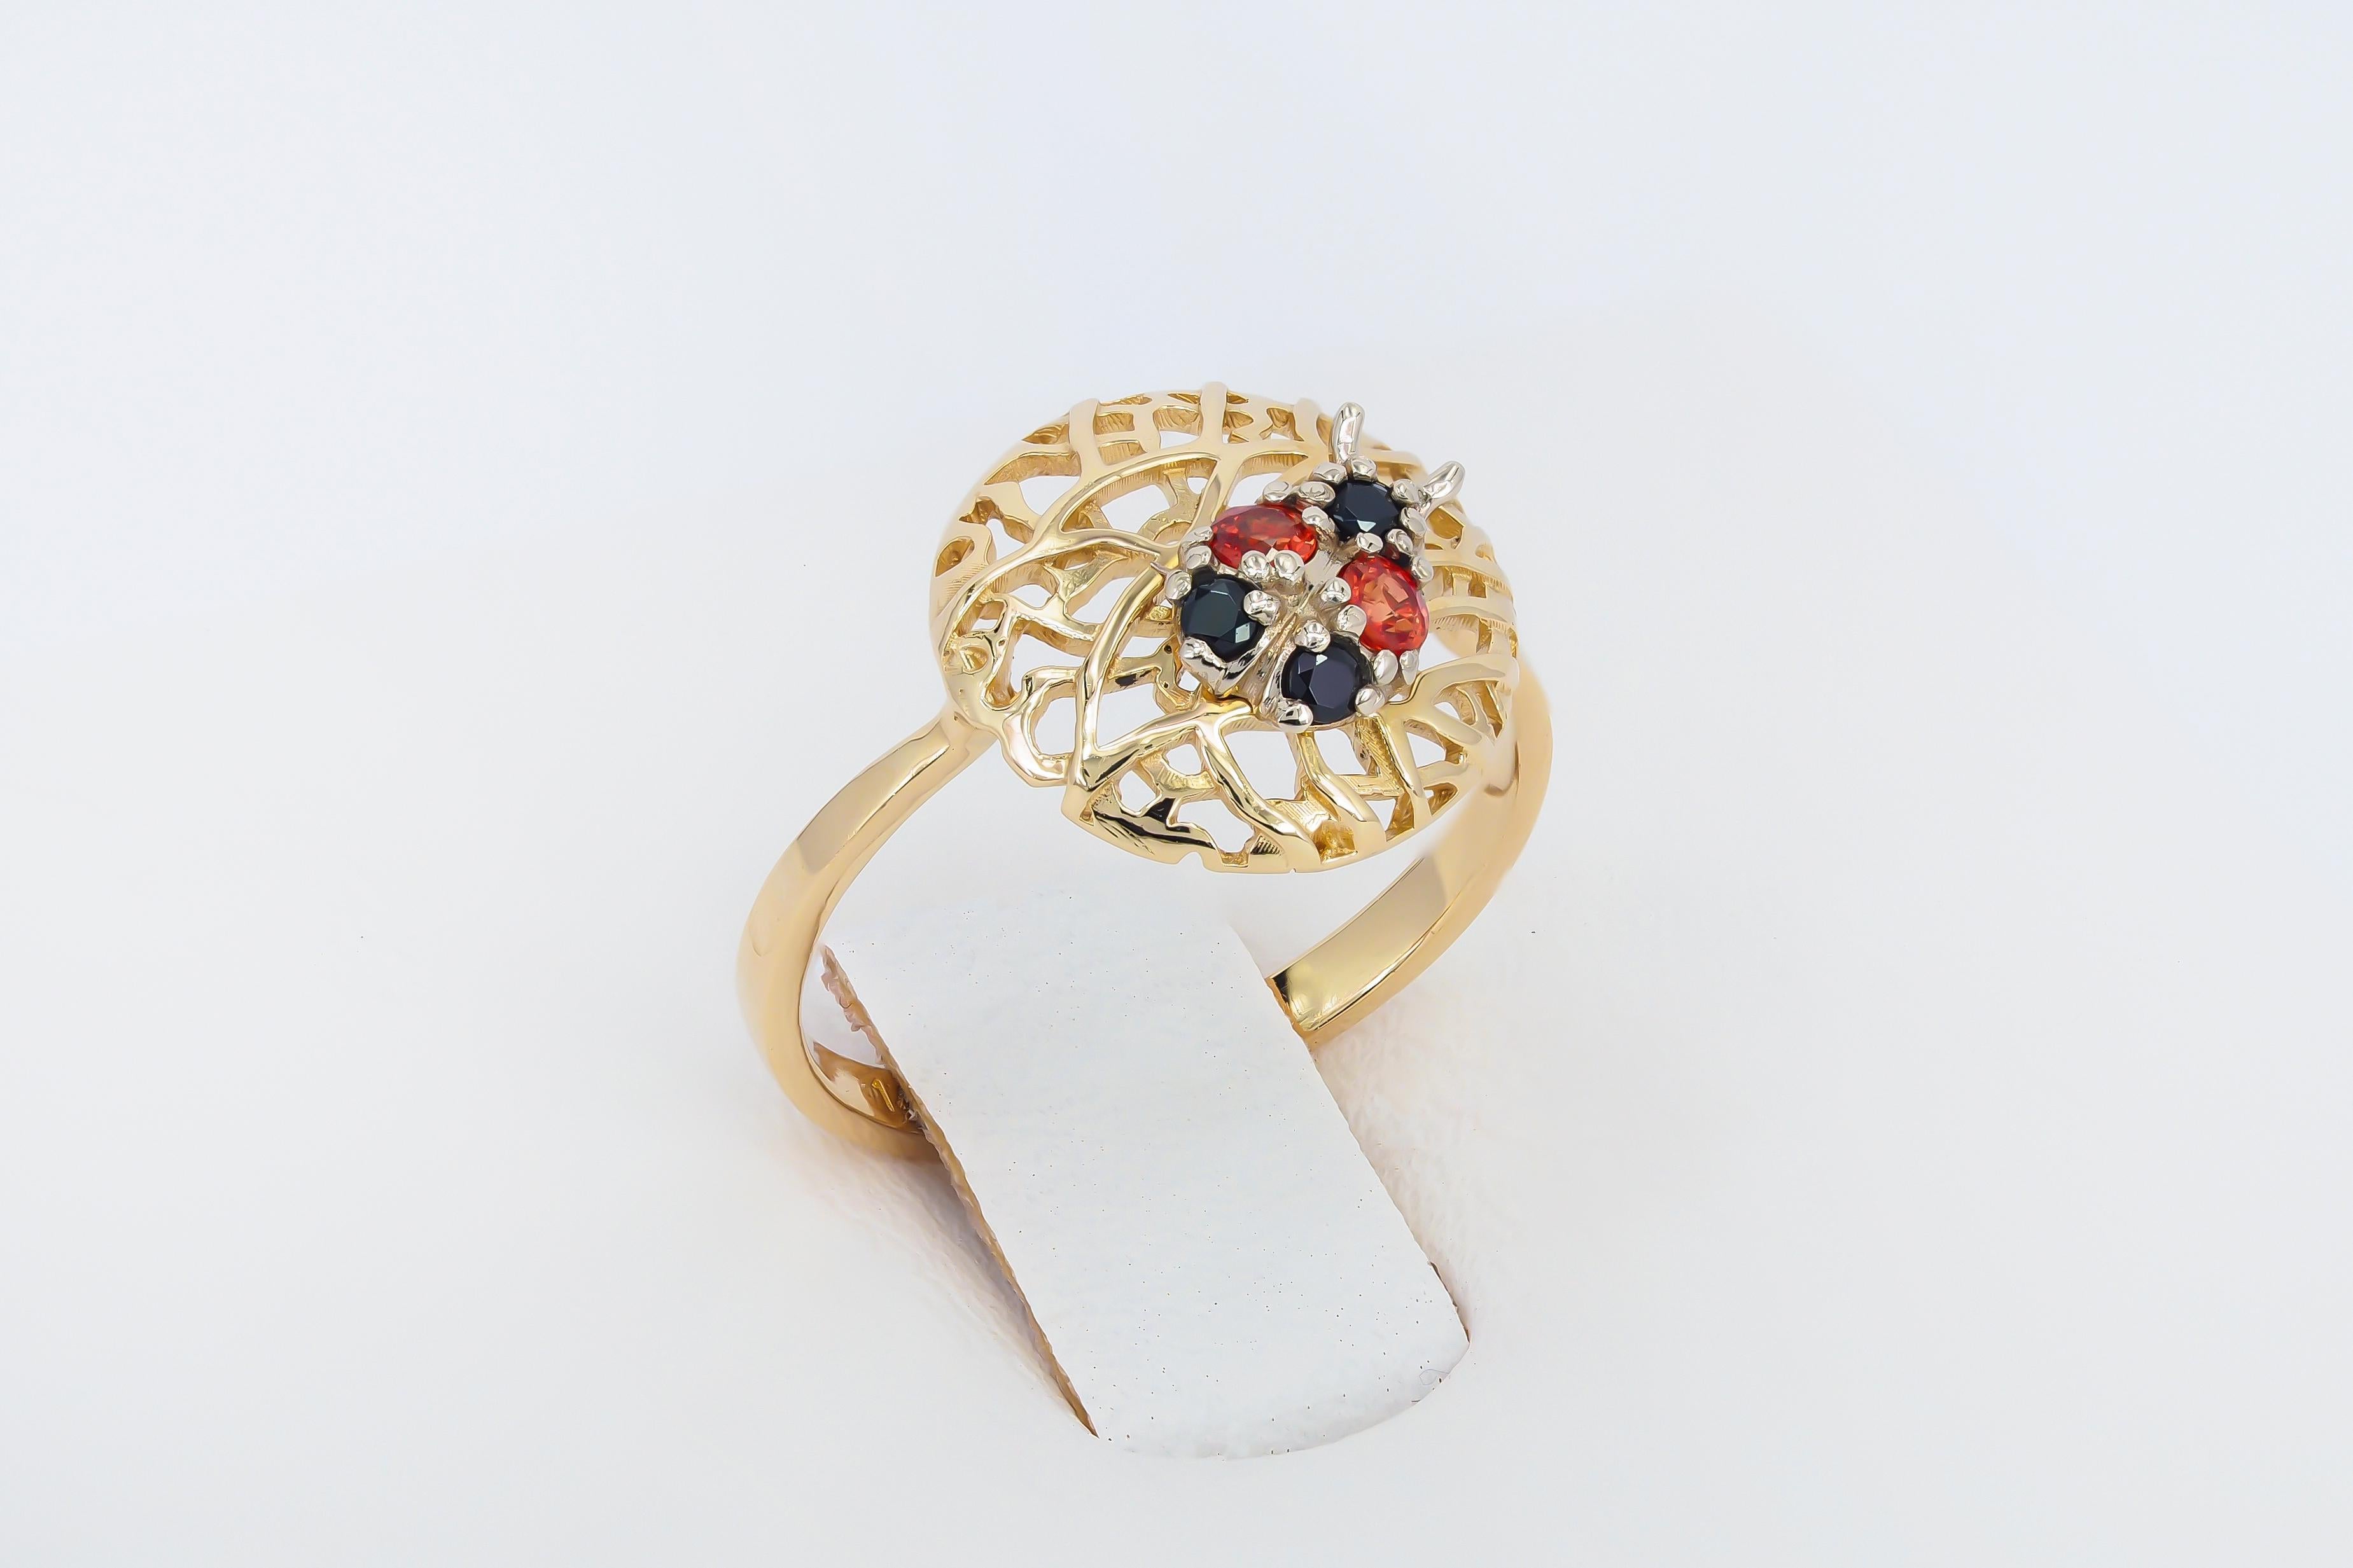 Women's Ladybug ring with colored gemstones.  For Sale